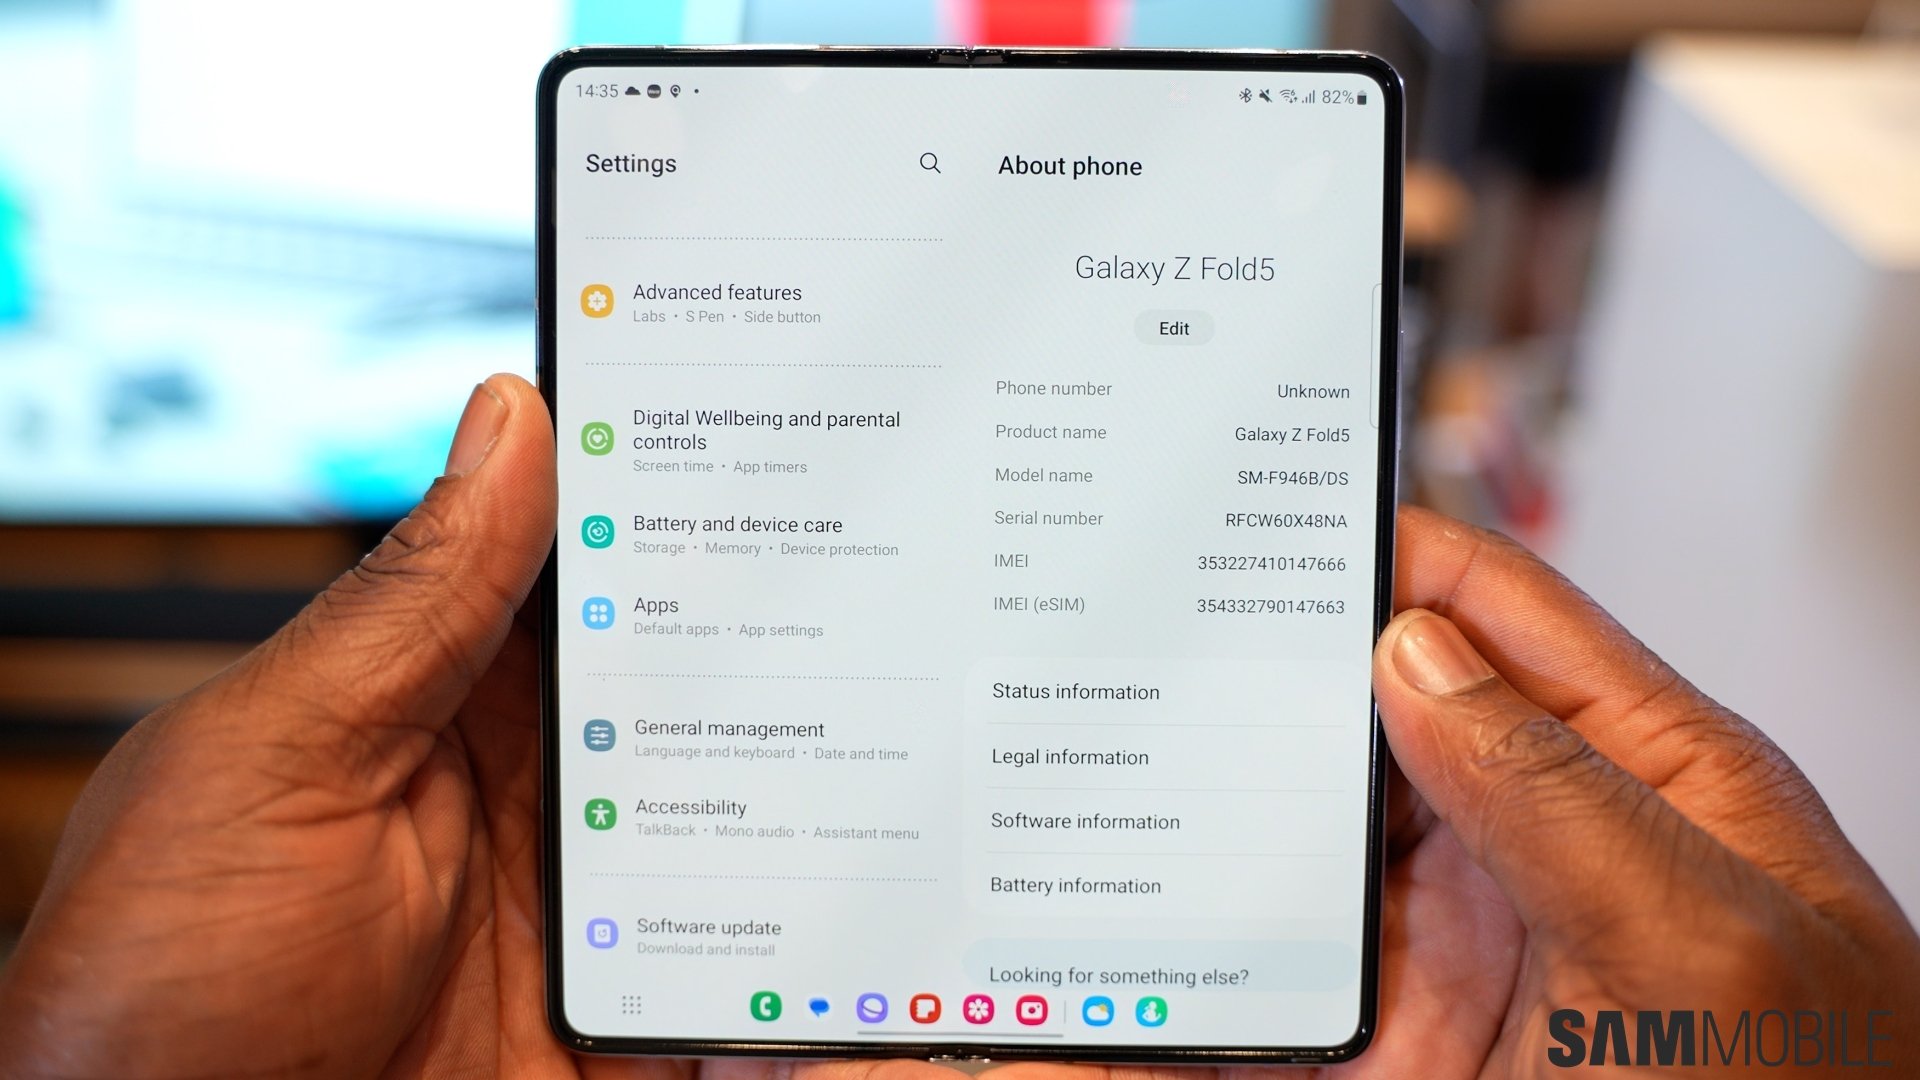 Samsung Galaxy Fold review: Lab tests - displays, battery life